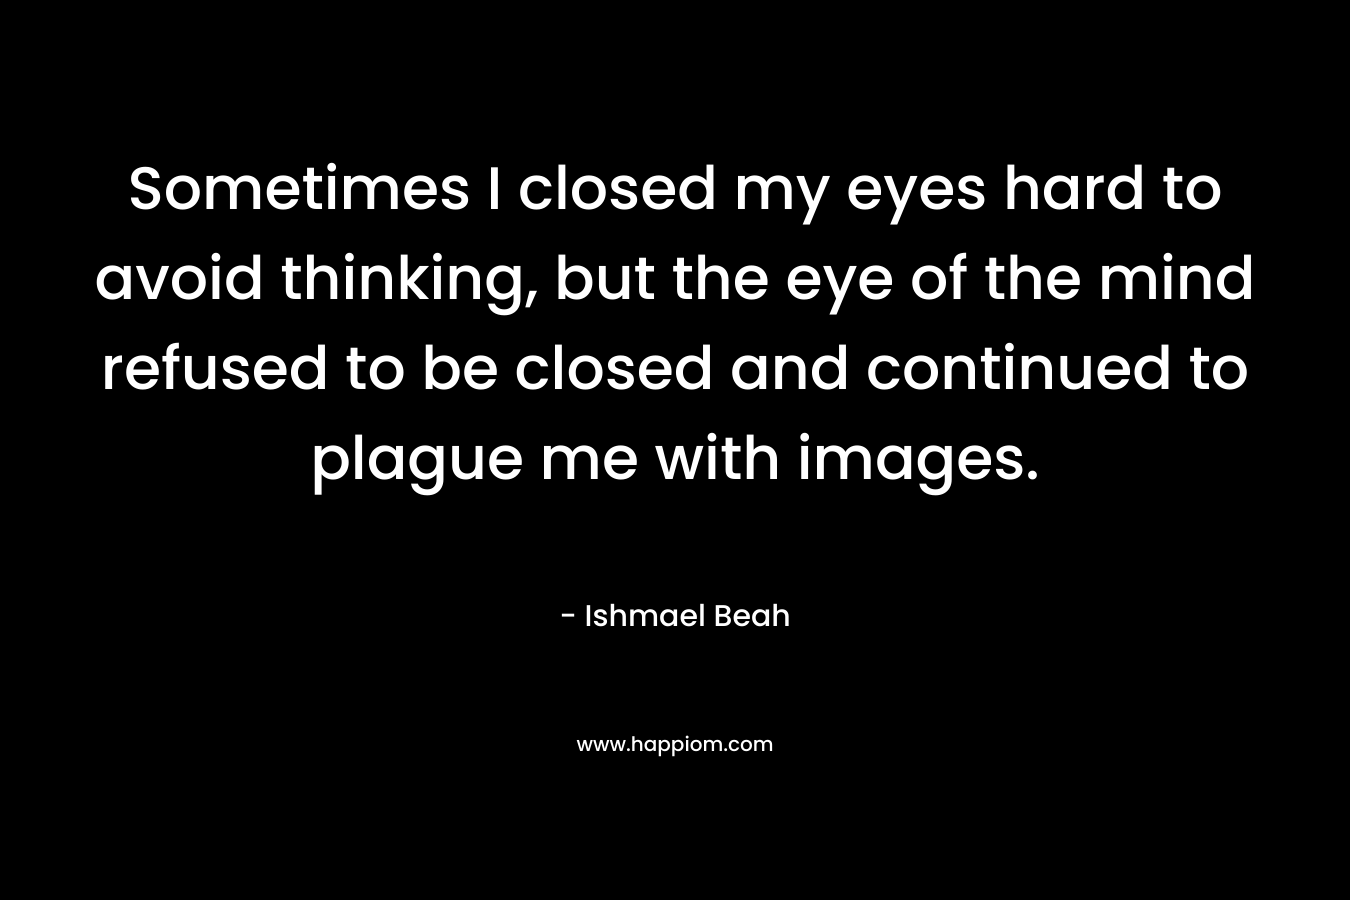 Sometimes I closed my eyes hard to avoid thinking, but the eye of the mind refused to be closed and continued to plague me with images. – Ishmael Beah